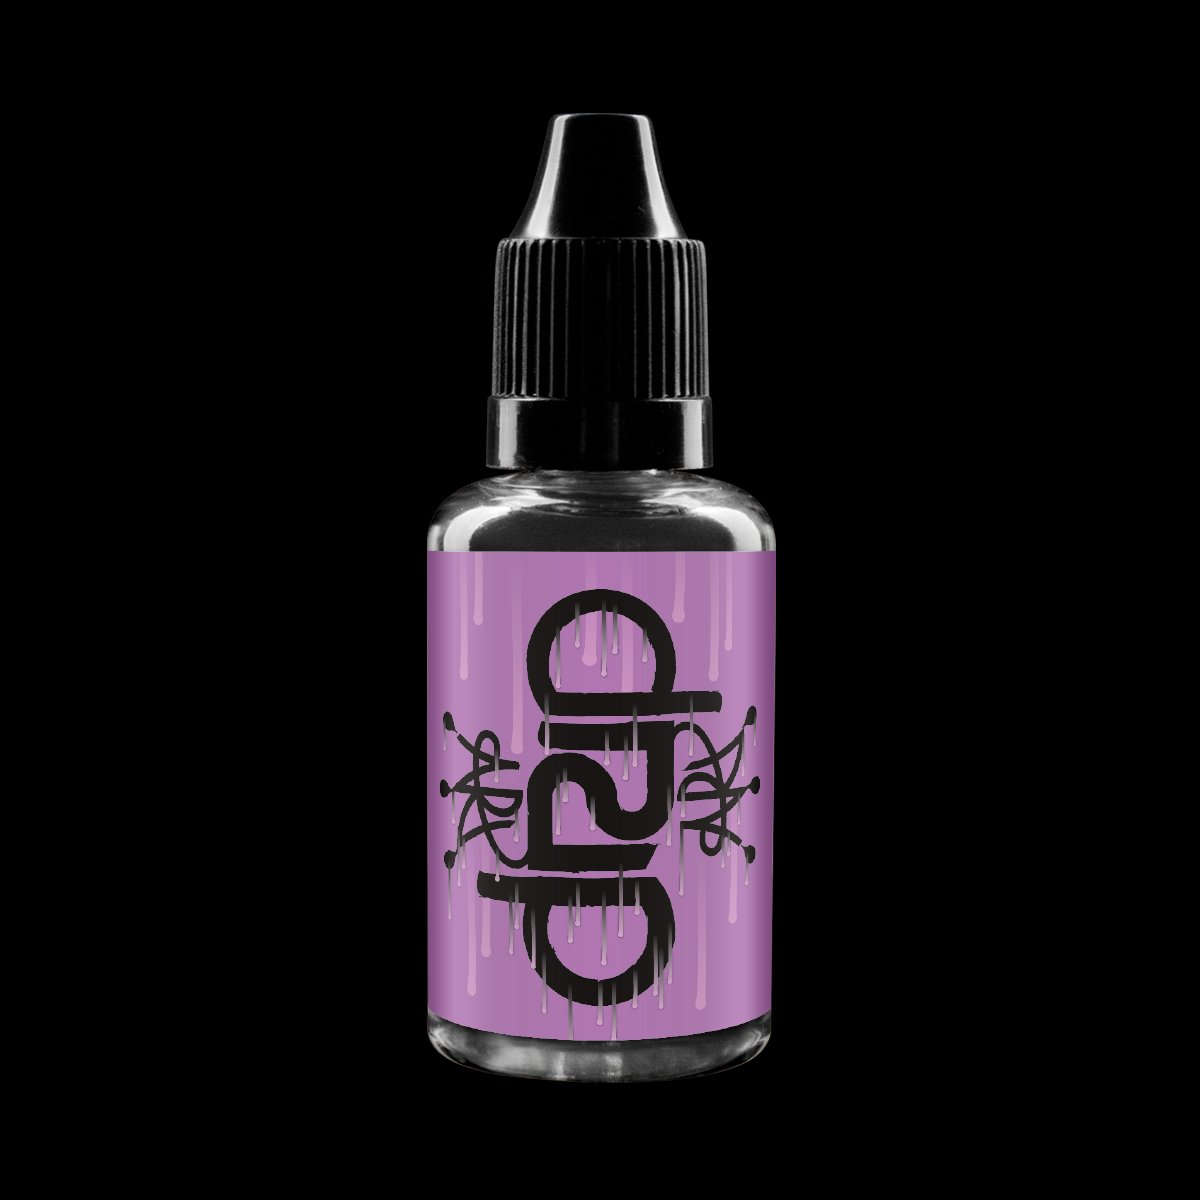 Wildling Flavour Concentrate by Drip Art